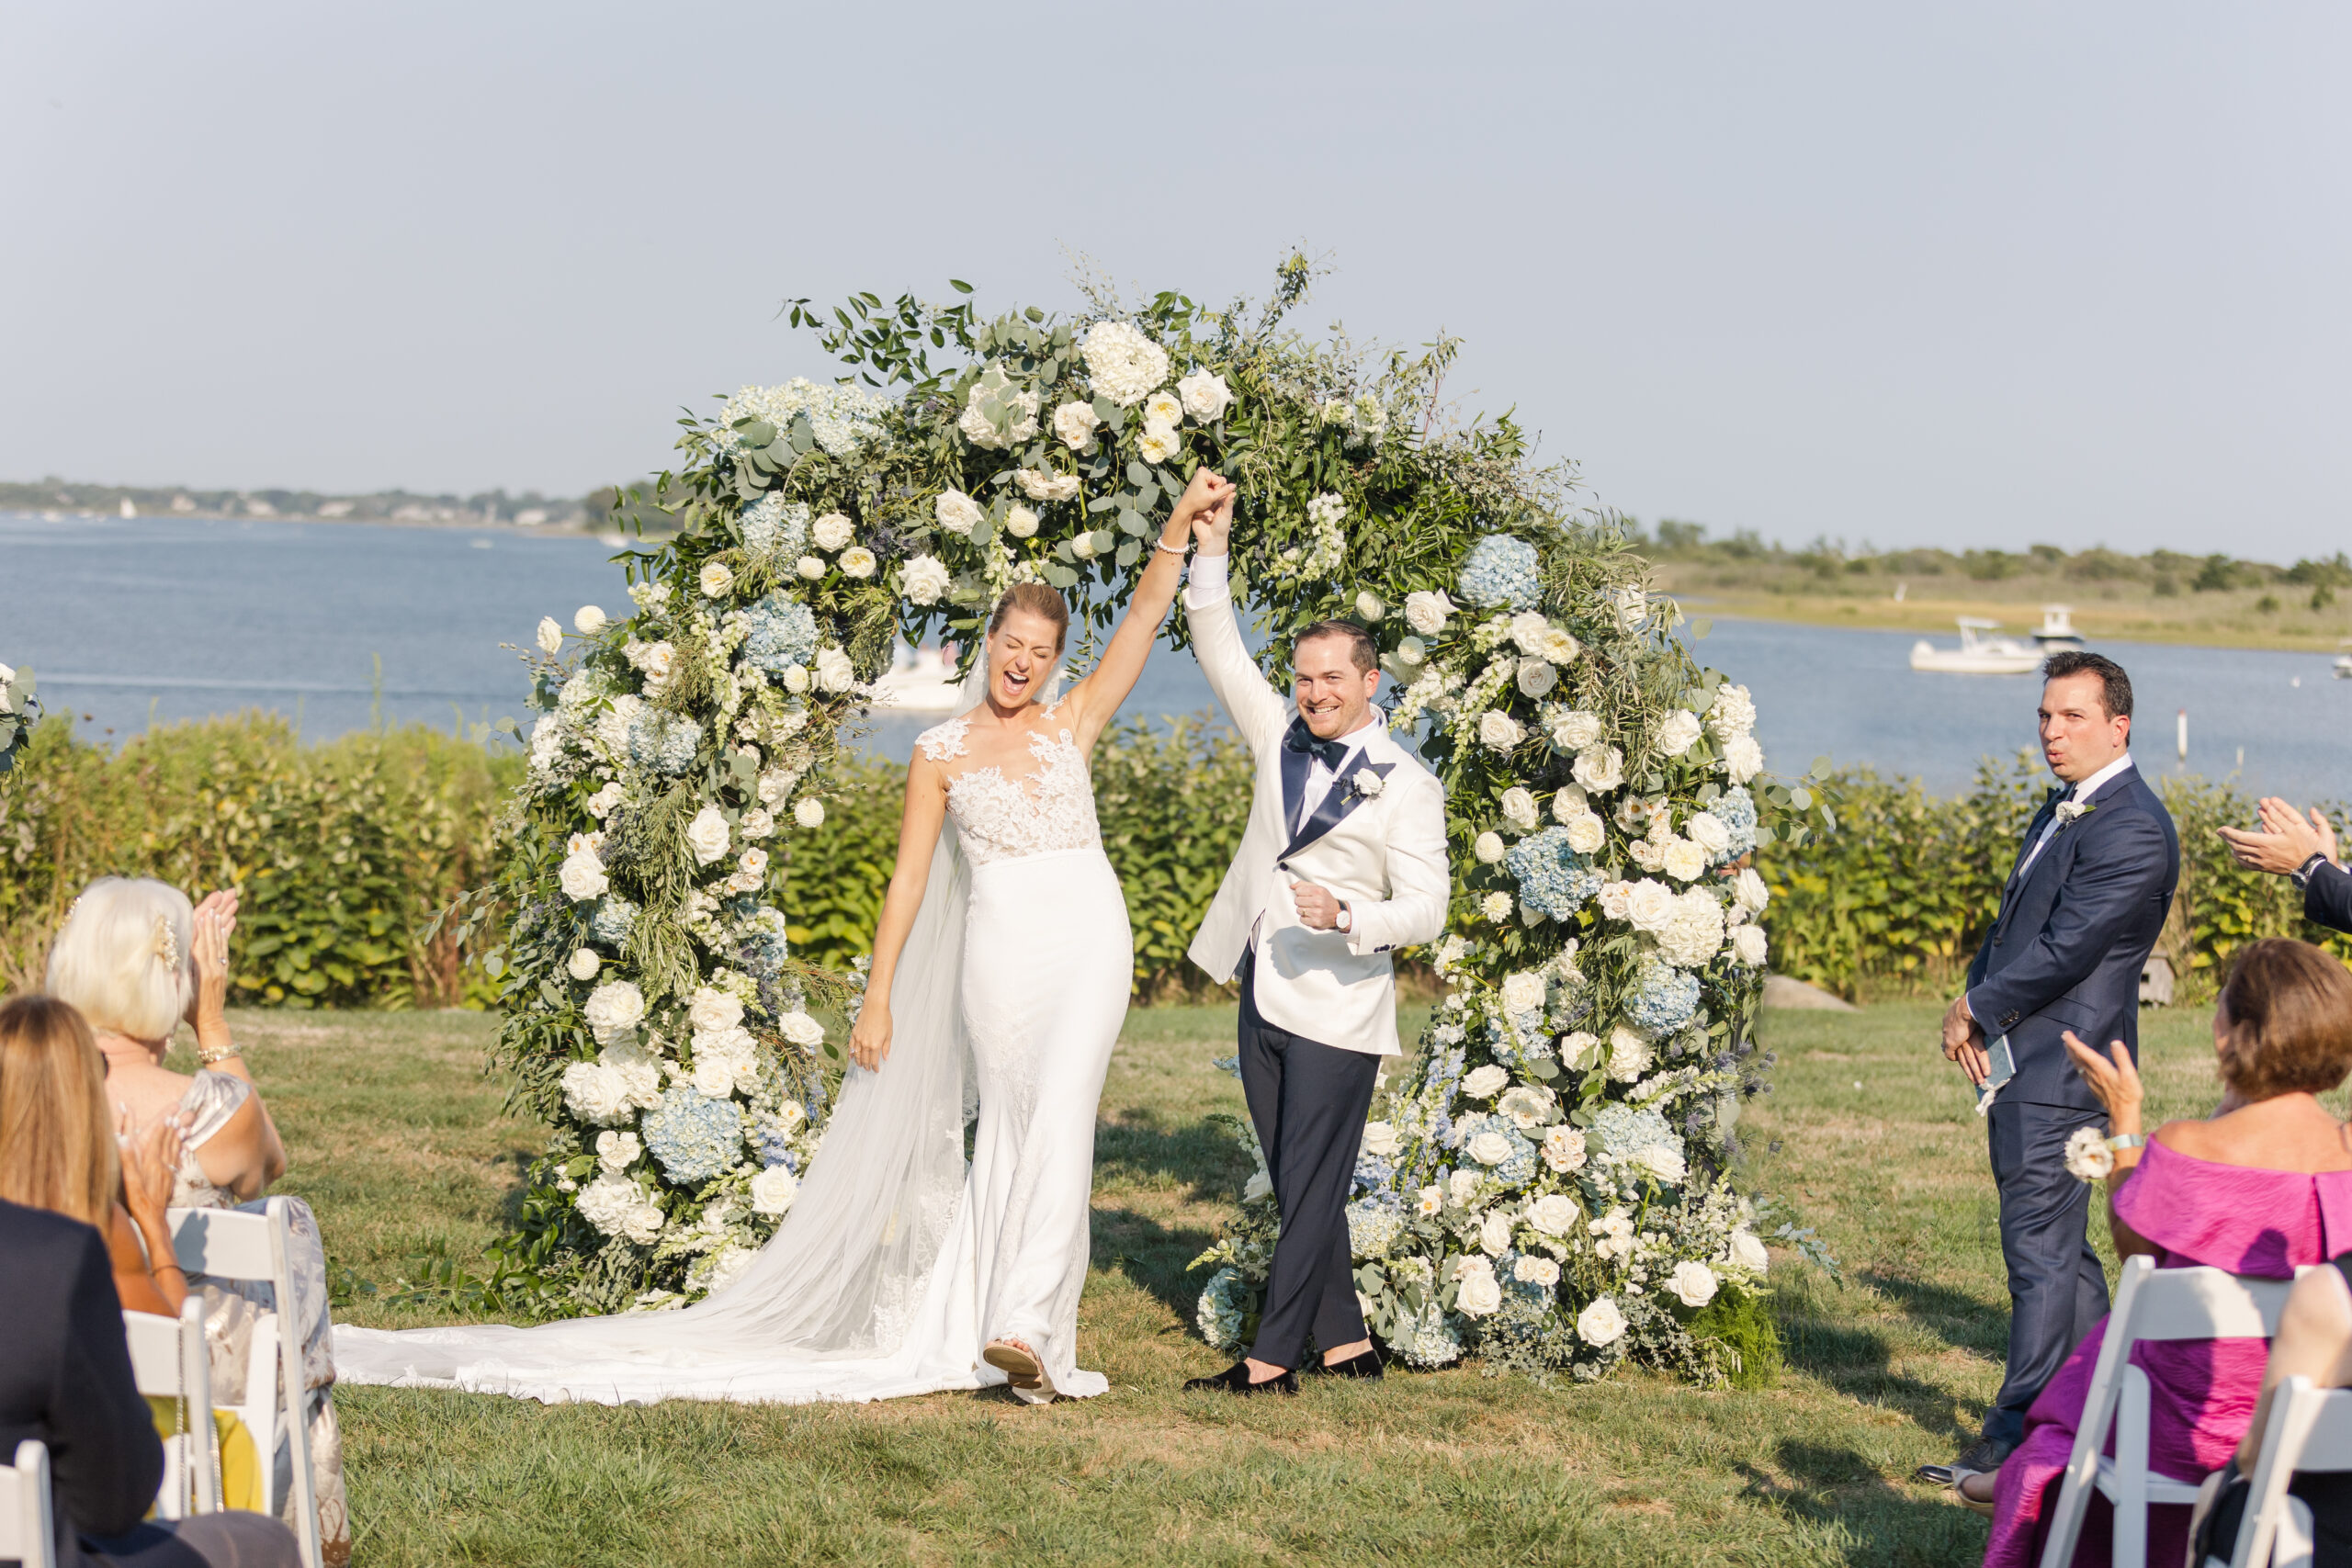 A bride and groom celebrate their wedding ceremony on the lawn at the Weekapaug Inn in Westerly RI.